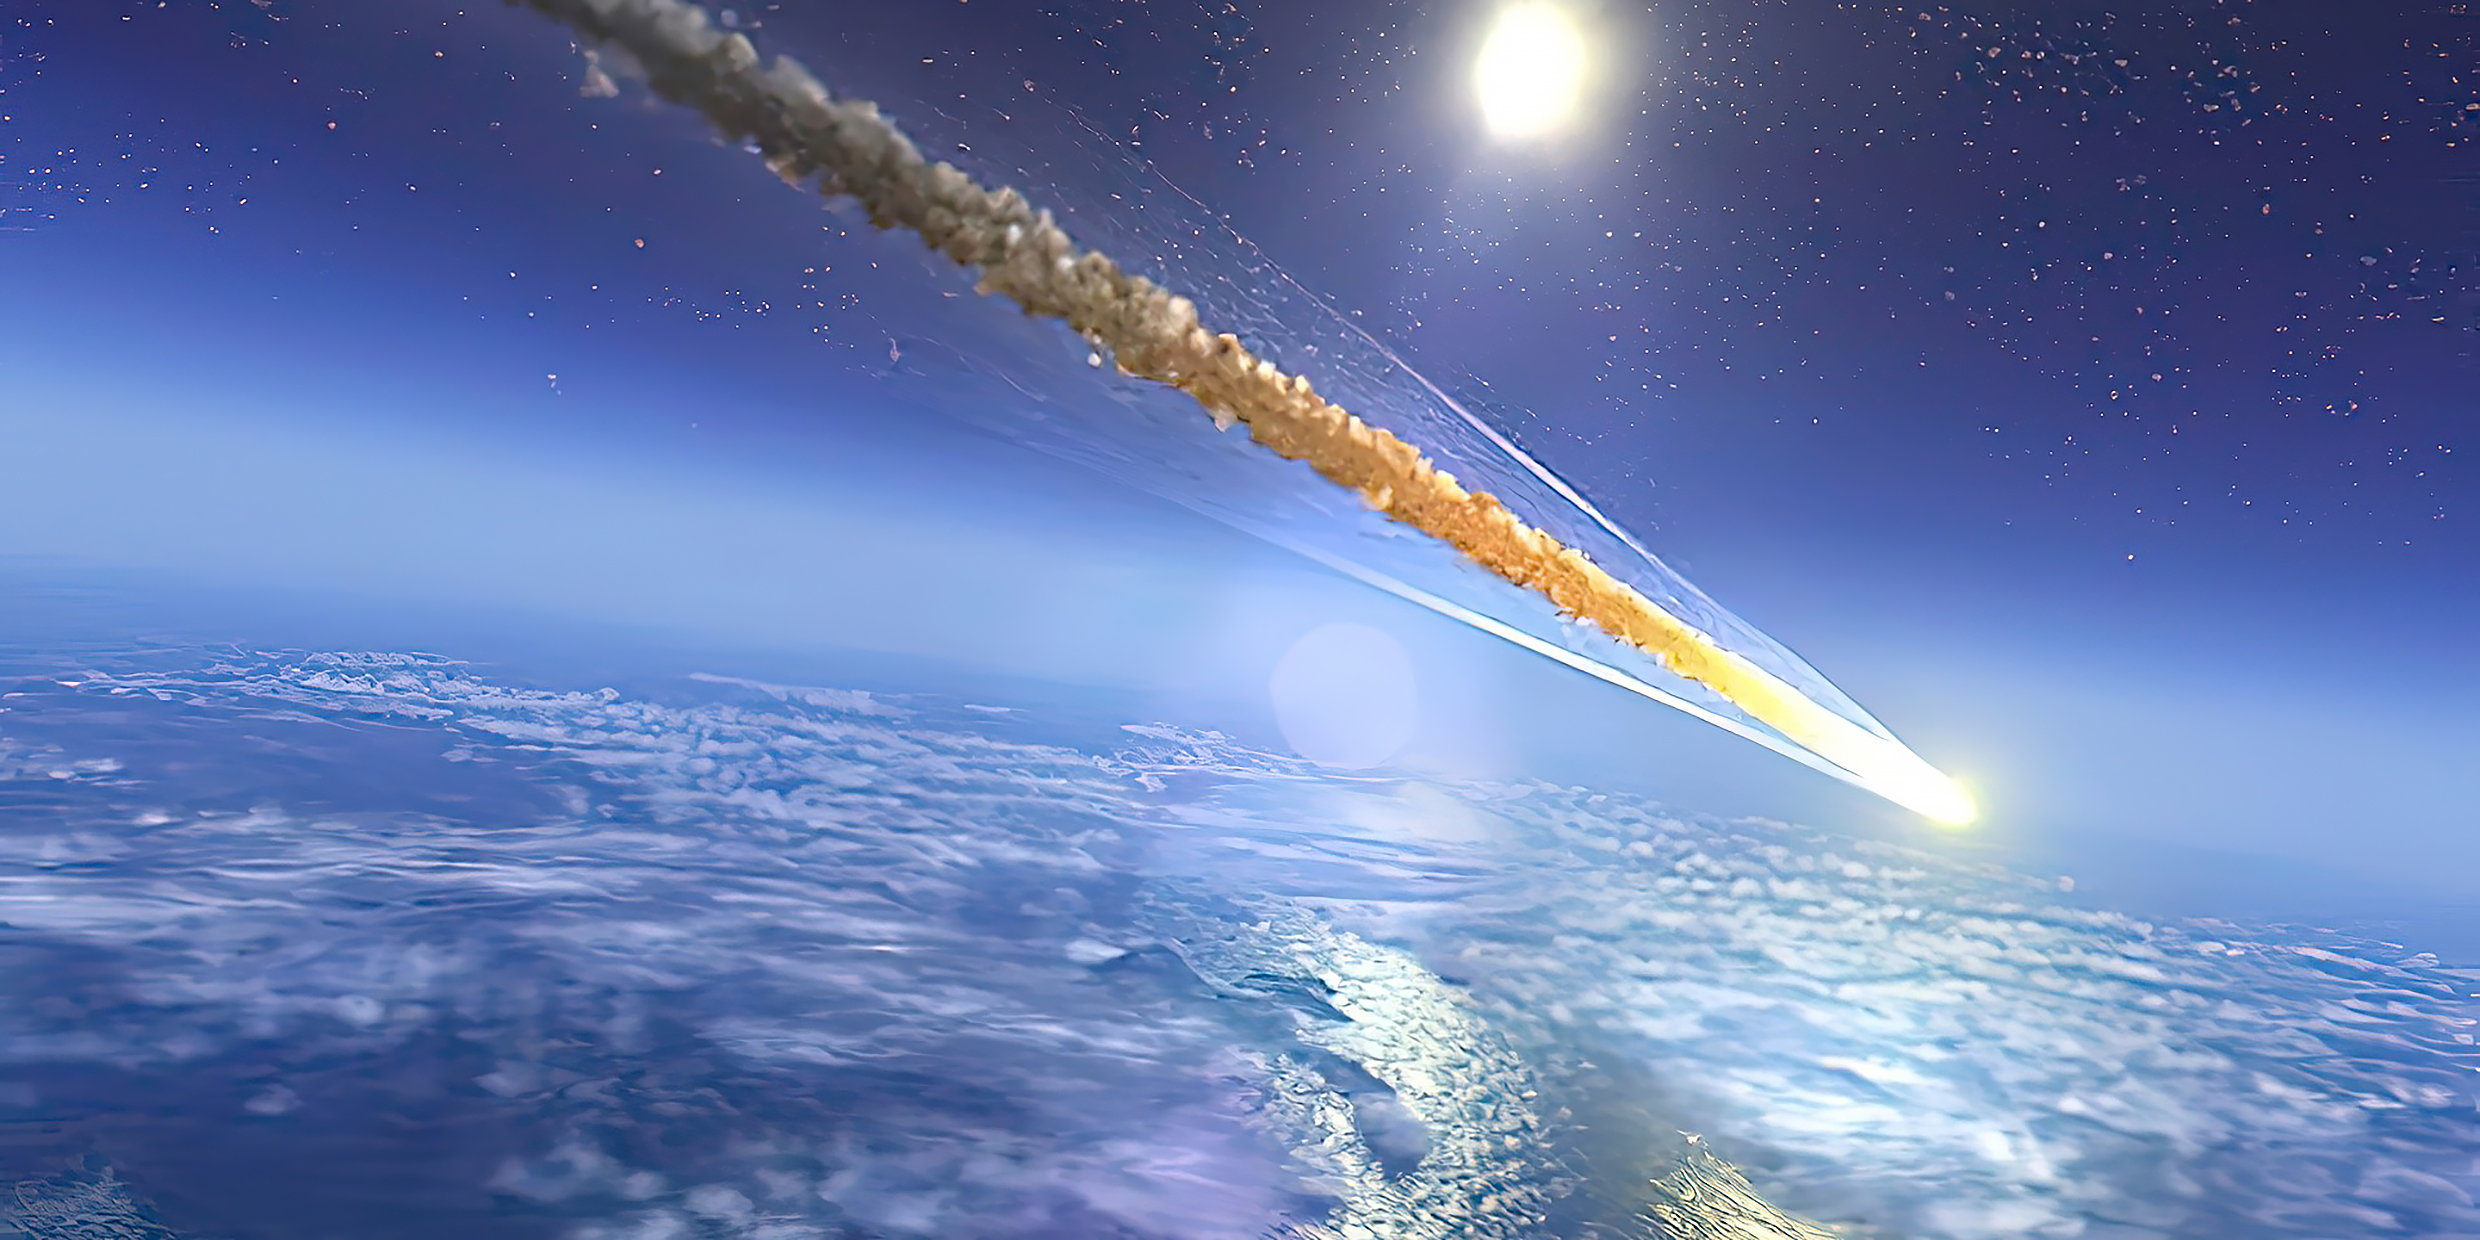 Artist's impression of a meteor impacting the Earth's atmosphere